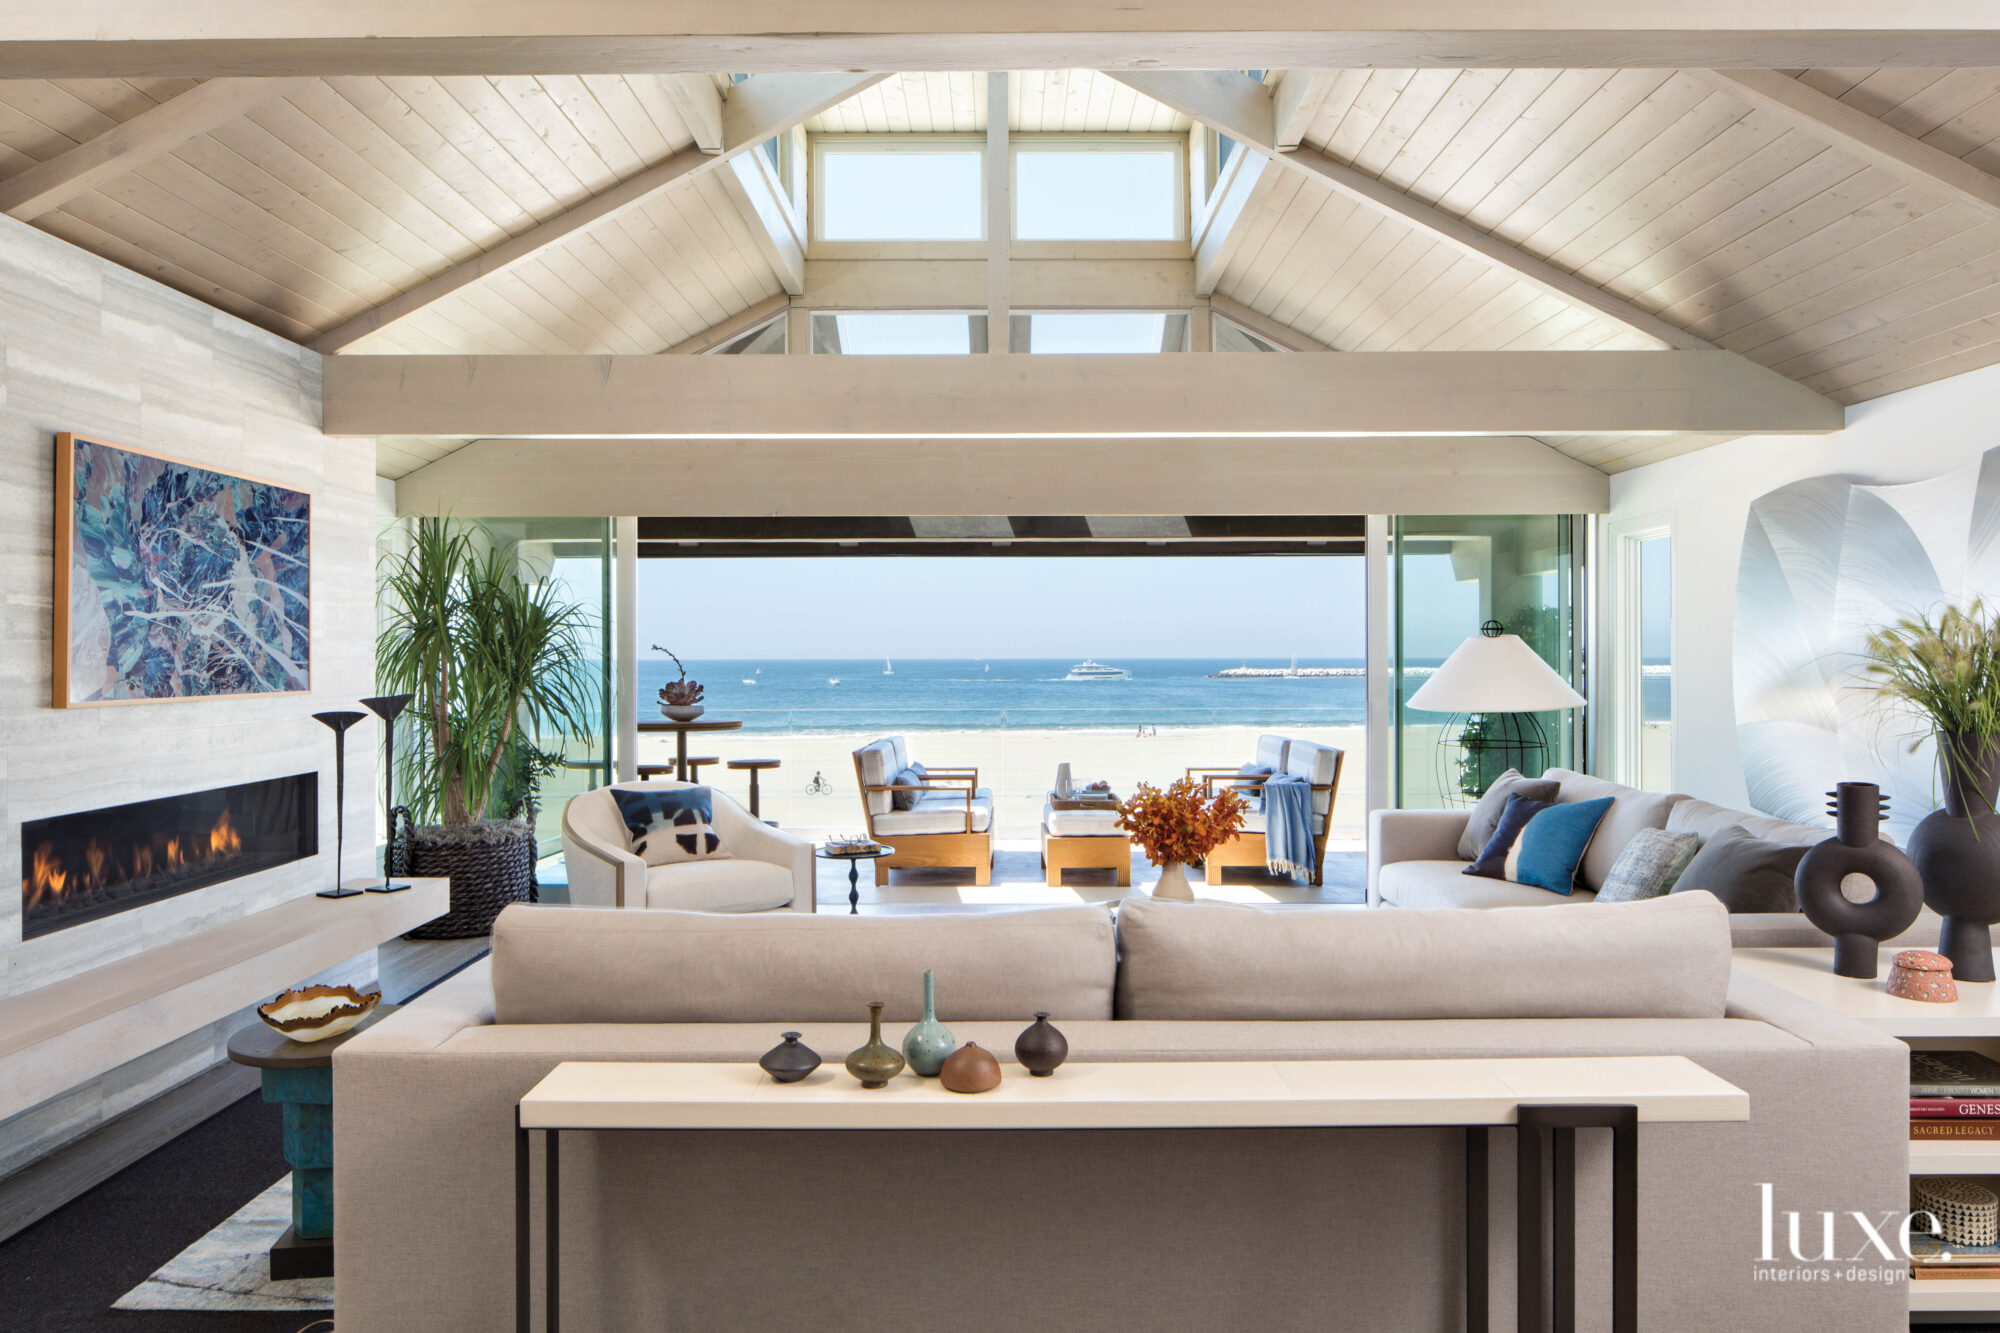 Living room with sofa looking out to outdoor seating and ocean